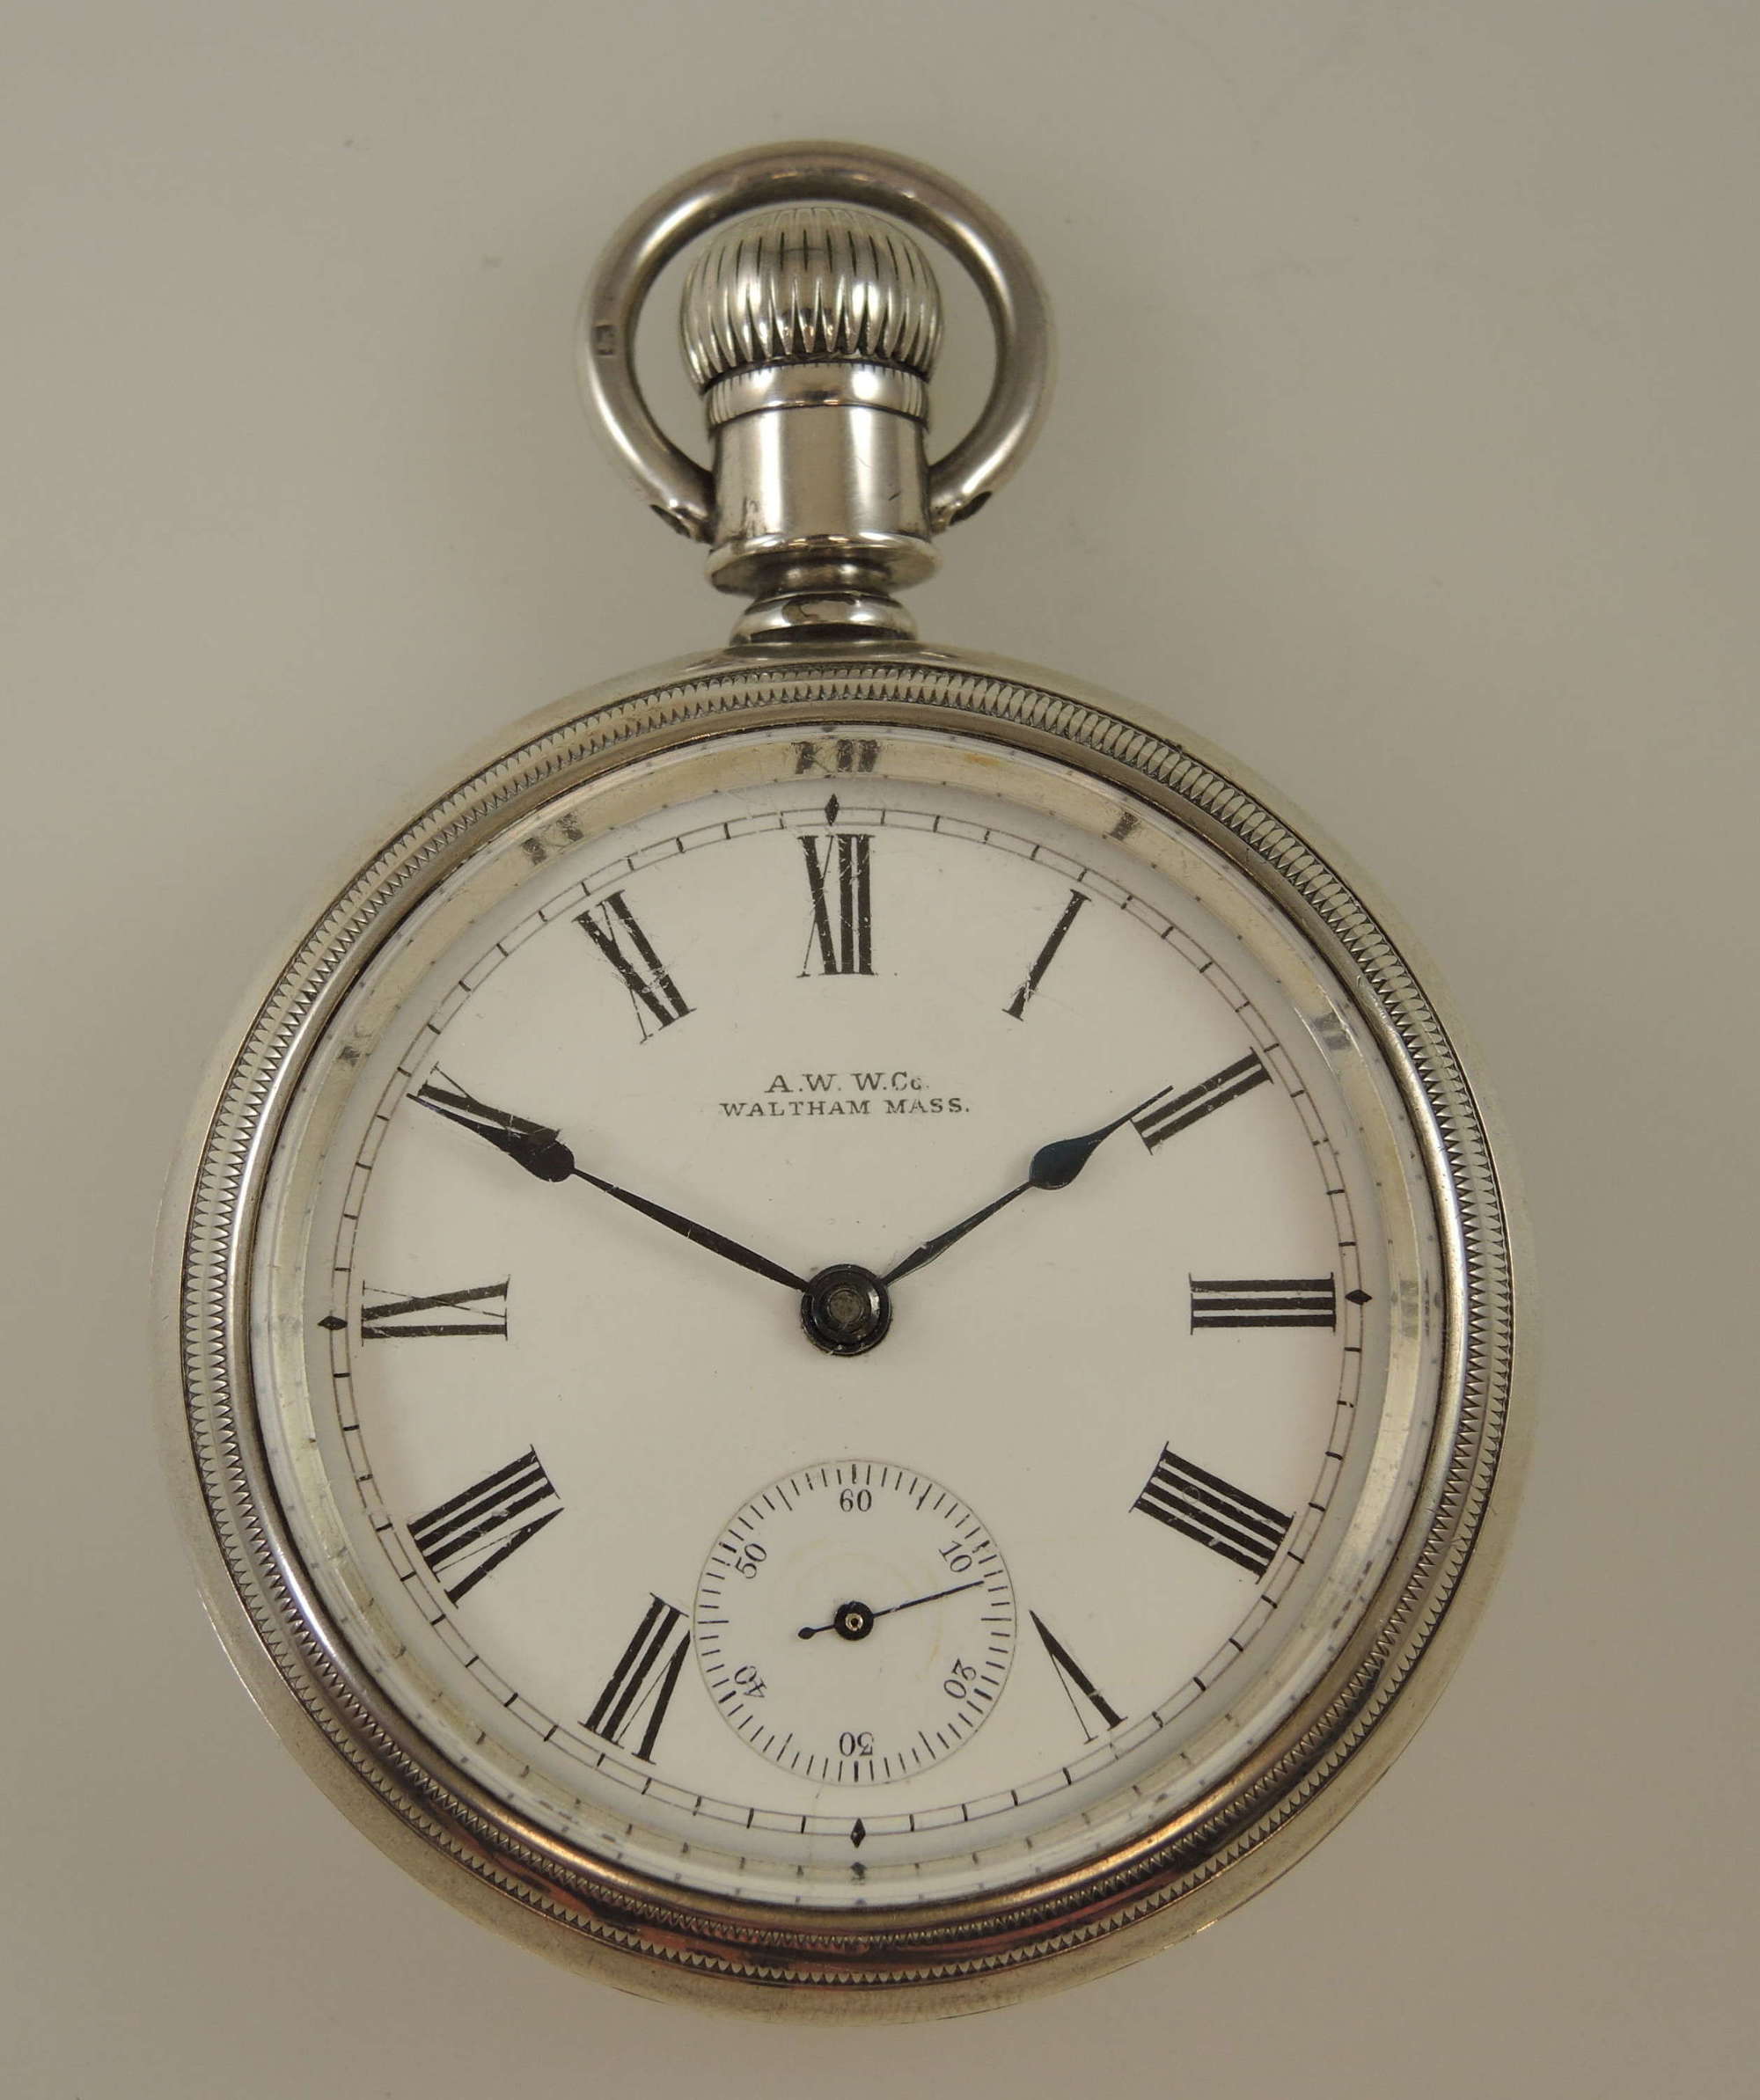 Large 18s 17J  Waltham SPECIAL Appleton Tracy & Co pocket watch c1901